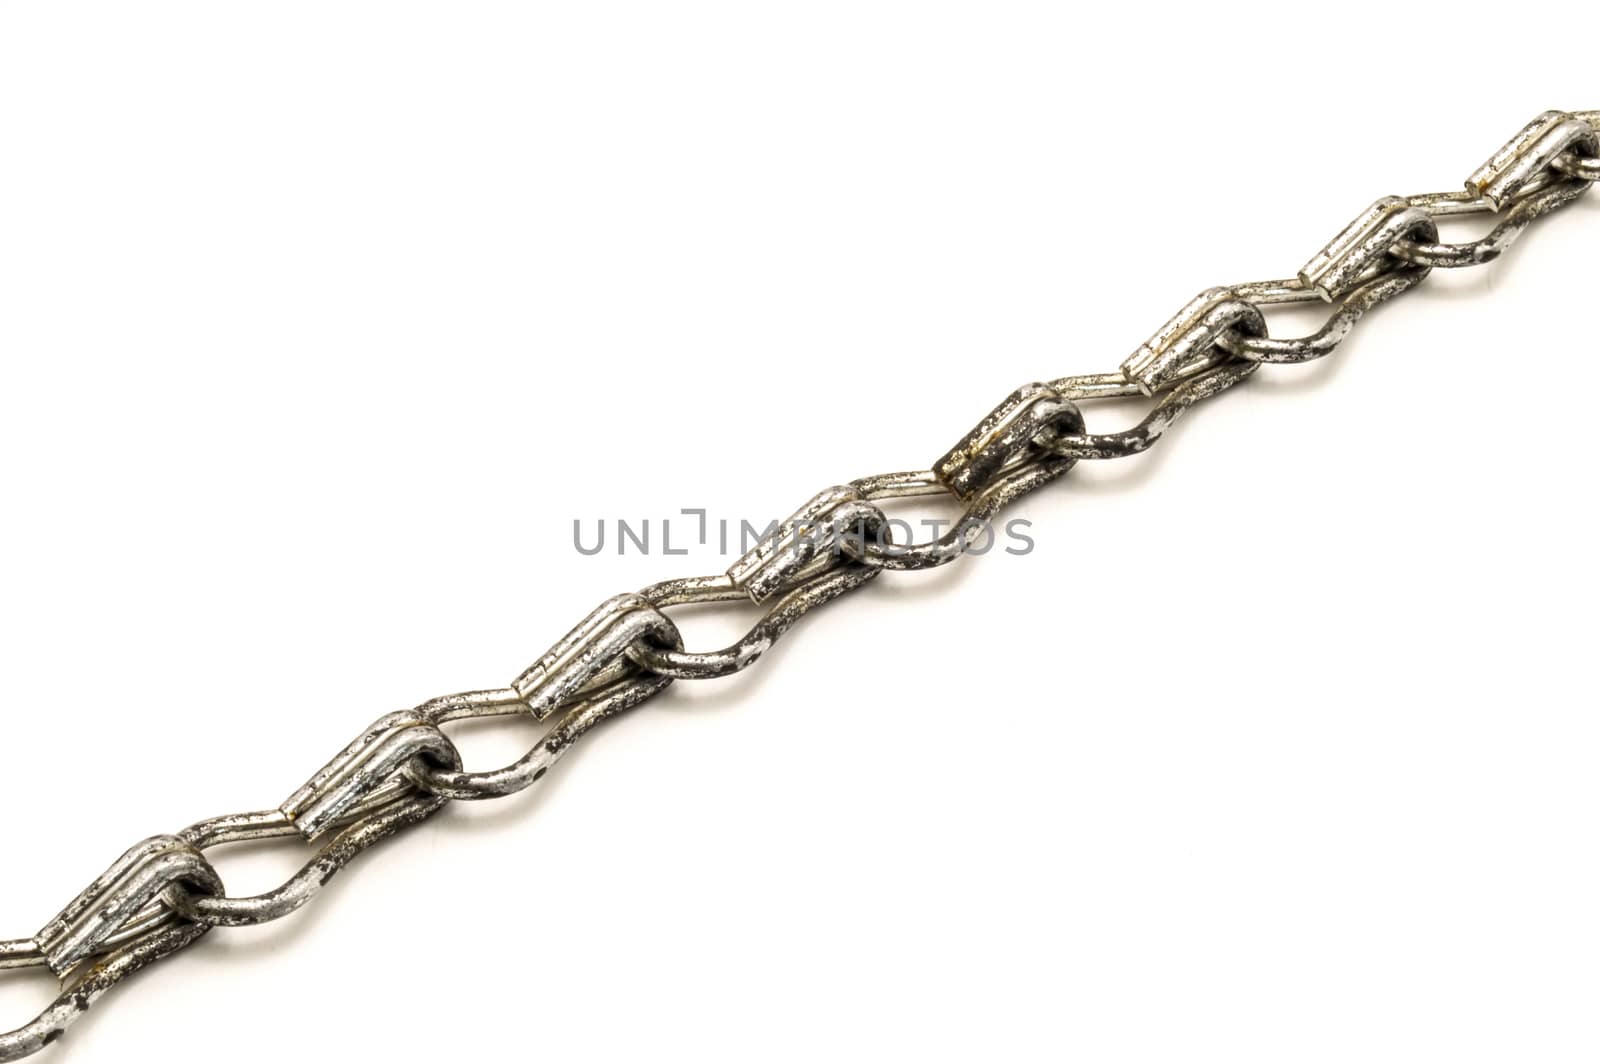 Rusty chain diagonally on a white background